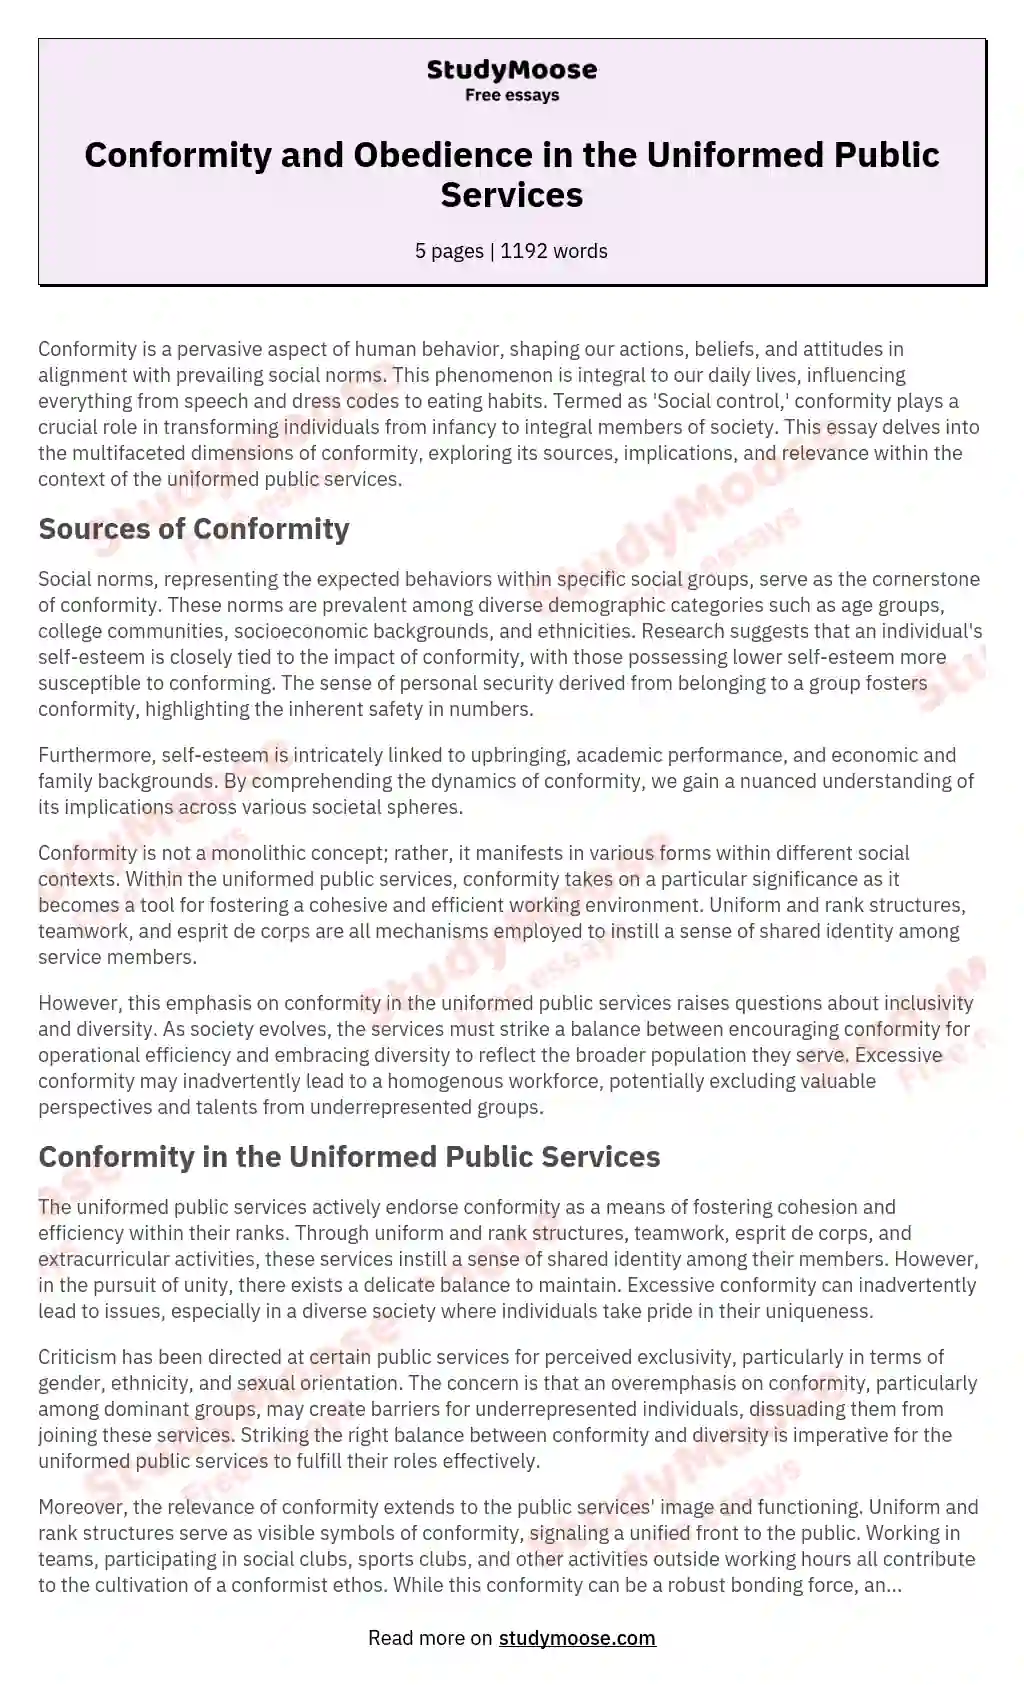 Conformity and Obedience in the Uniformed Public Services essay